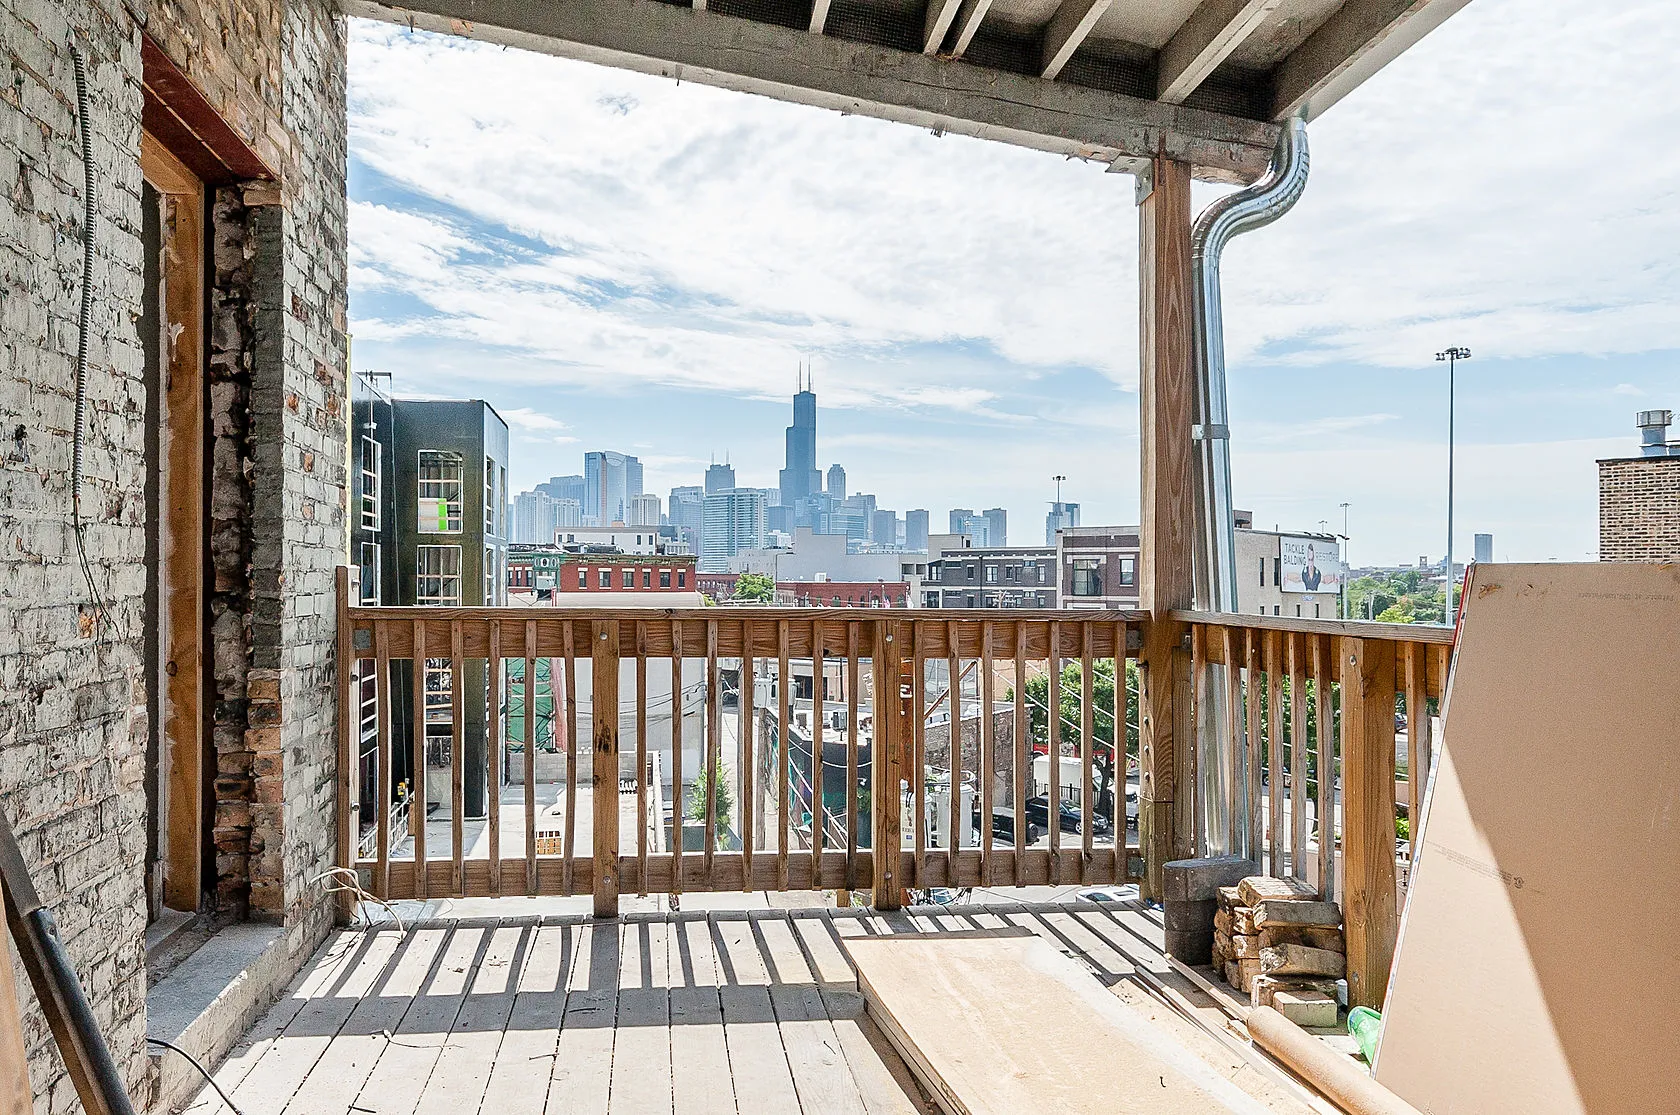 836 N Milwaukee Ave 60642 60642-unit#4R-Chicago-IL